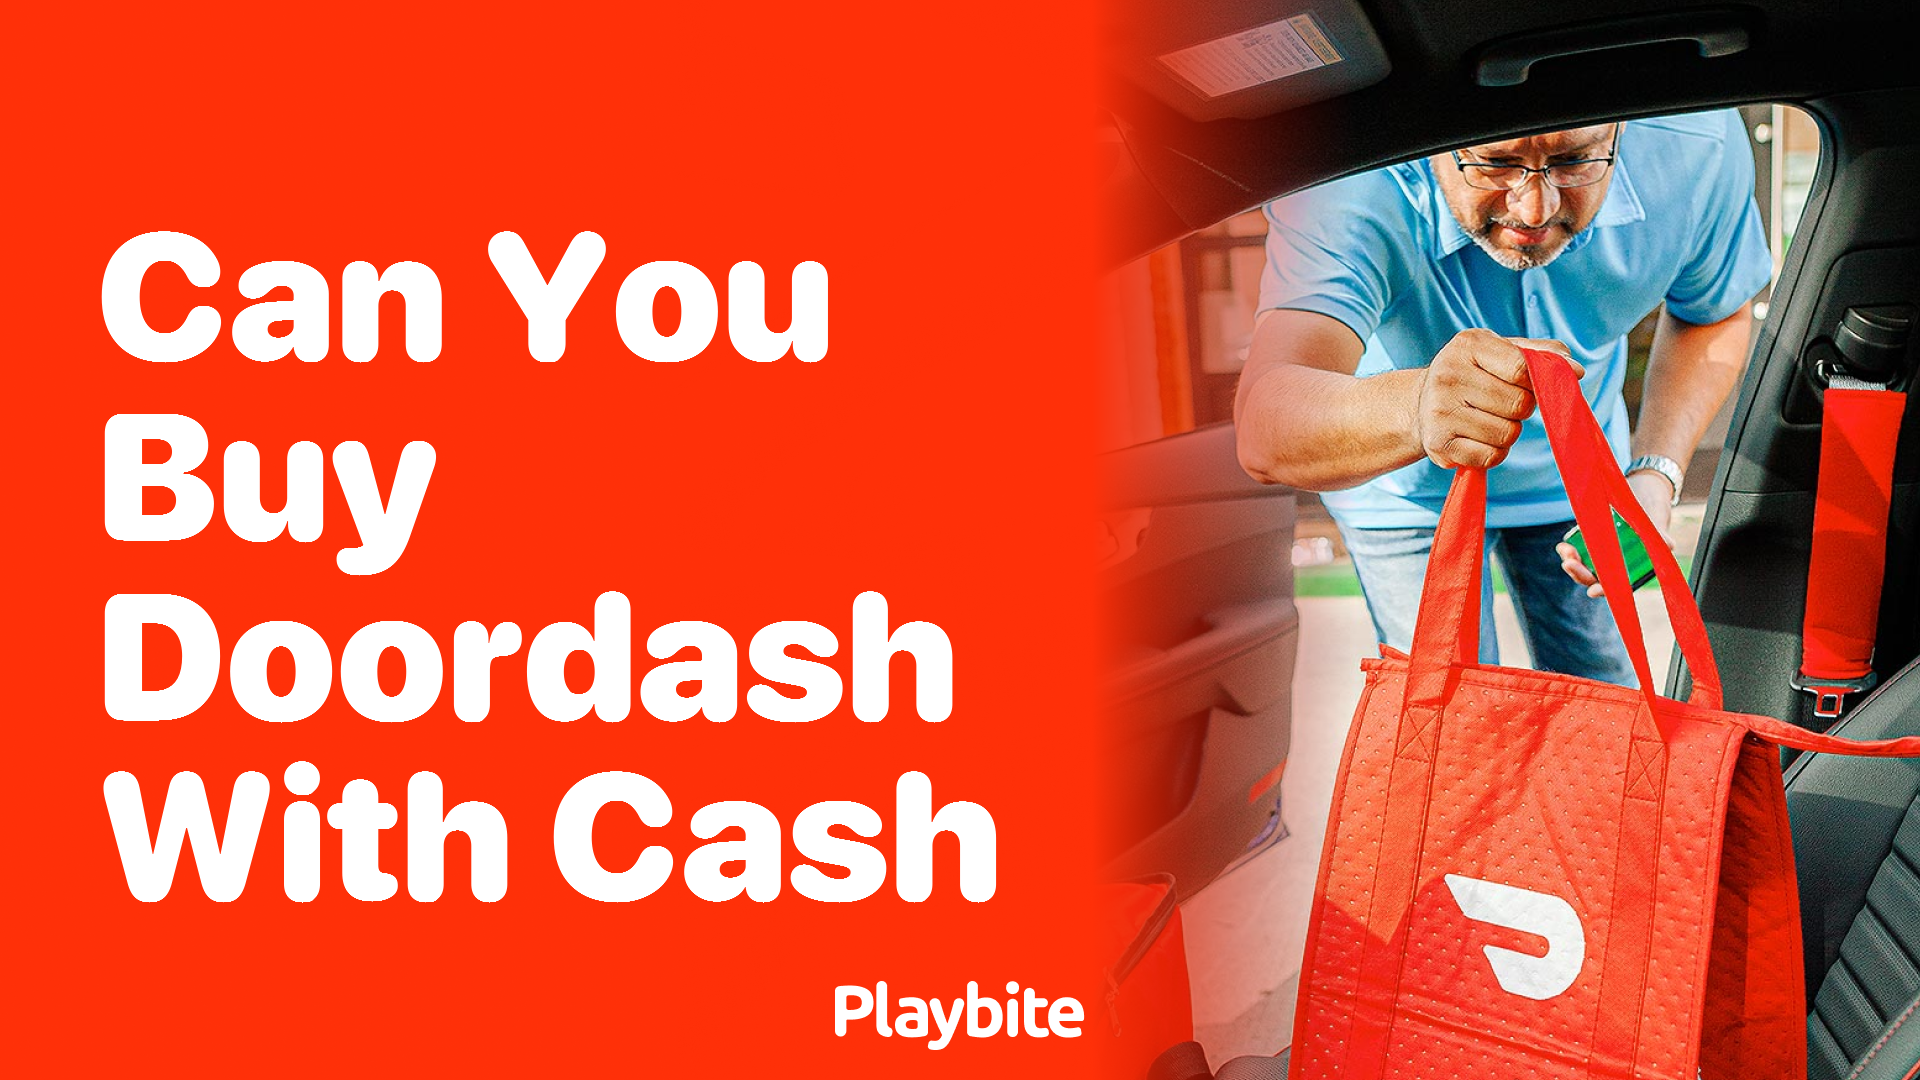 Can You Buy DoorDash with Cash?